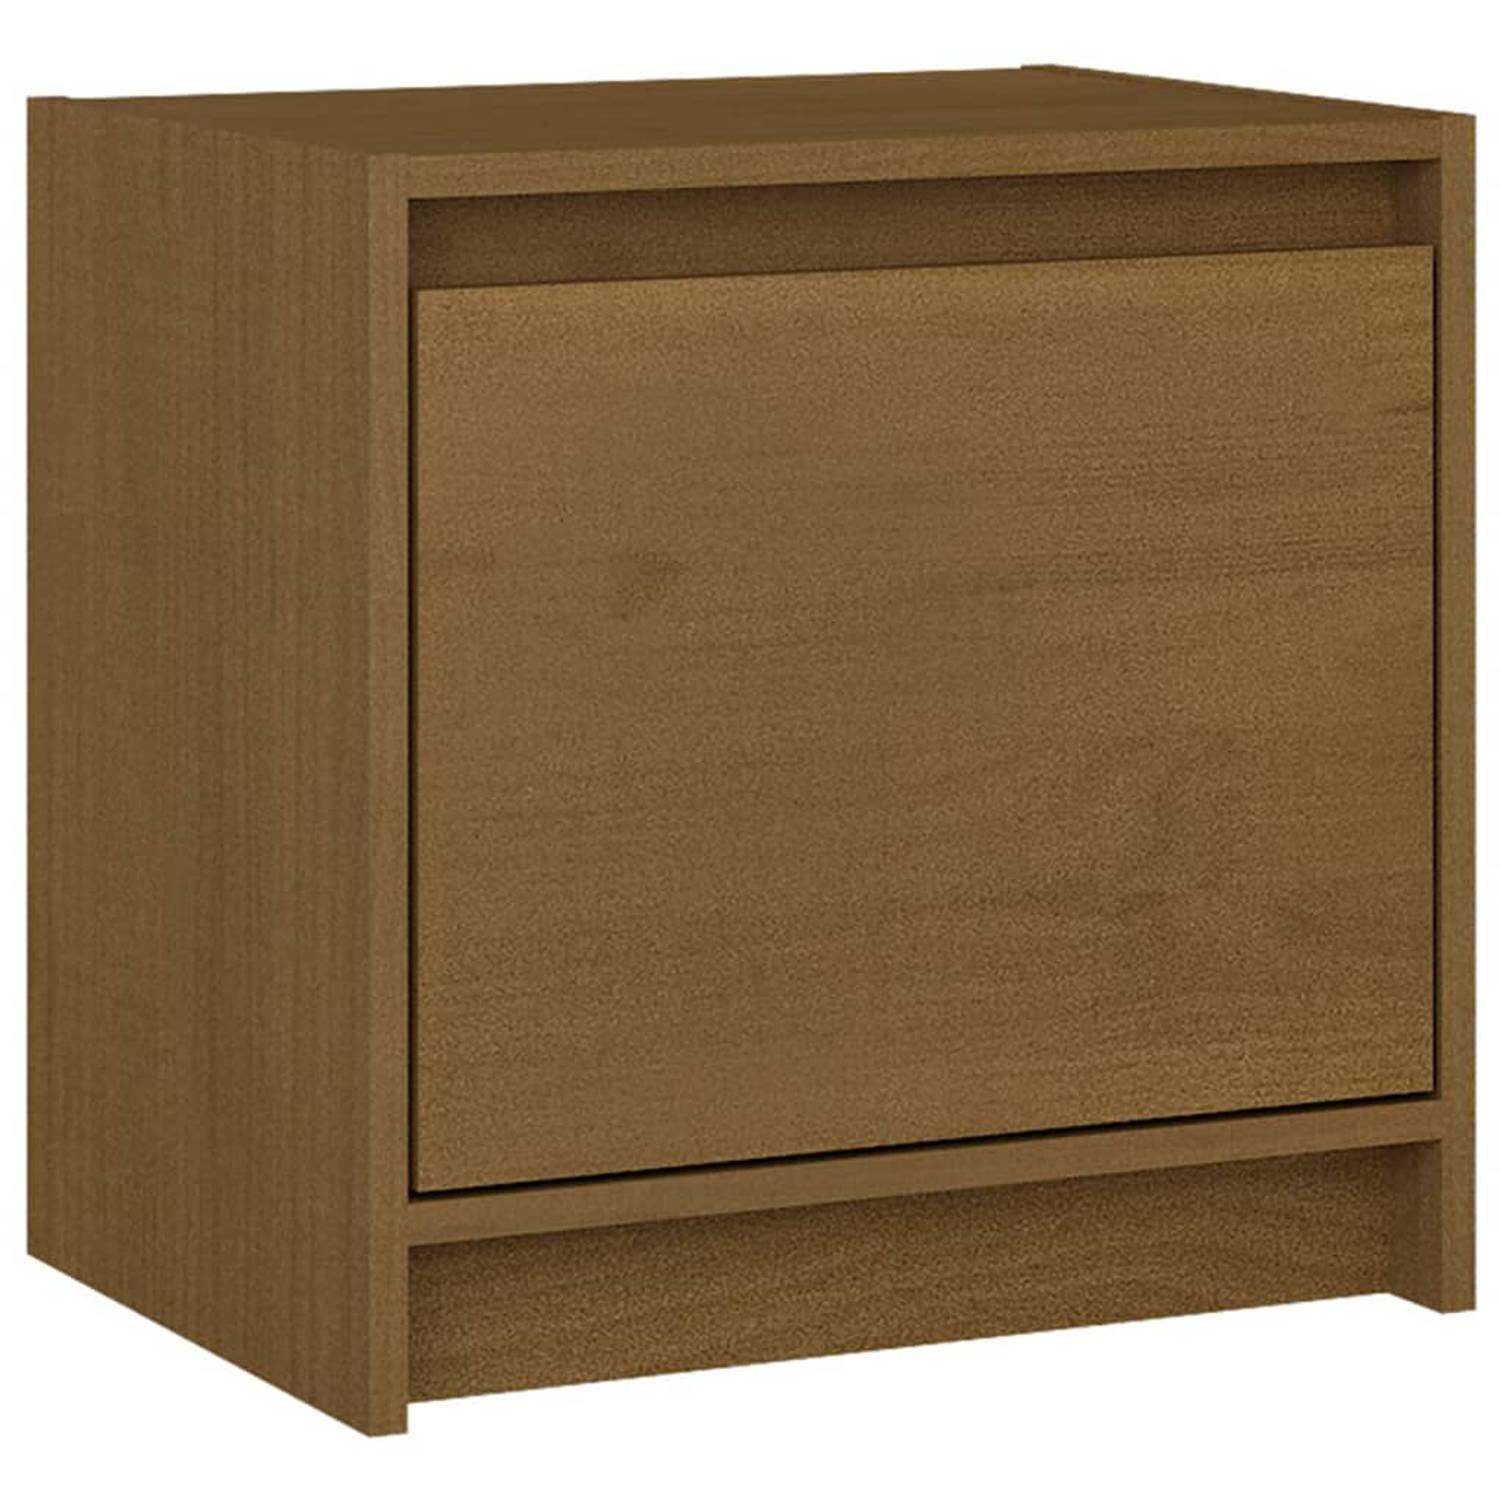 The Living Store Nachtkastje - Musthave - Hout - 40x30.5x40 cm - Honingbruin